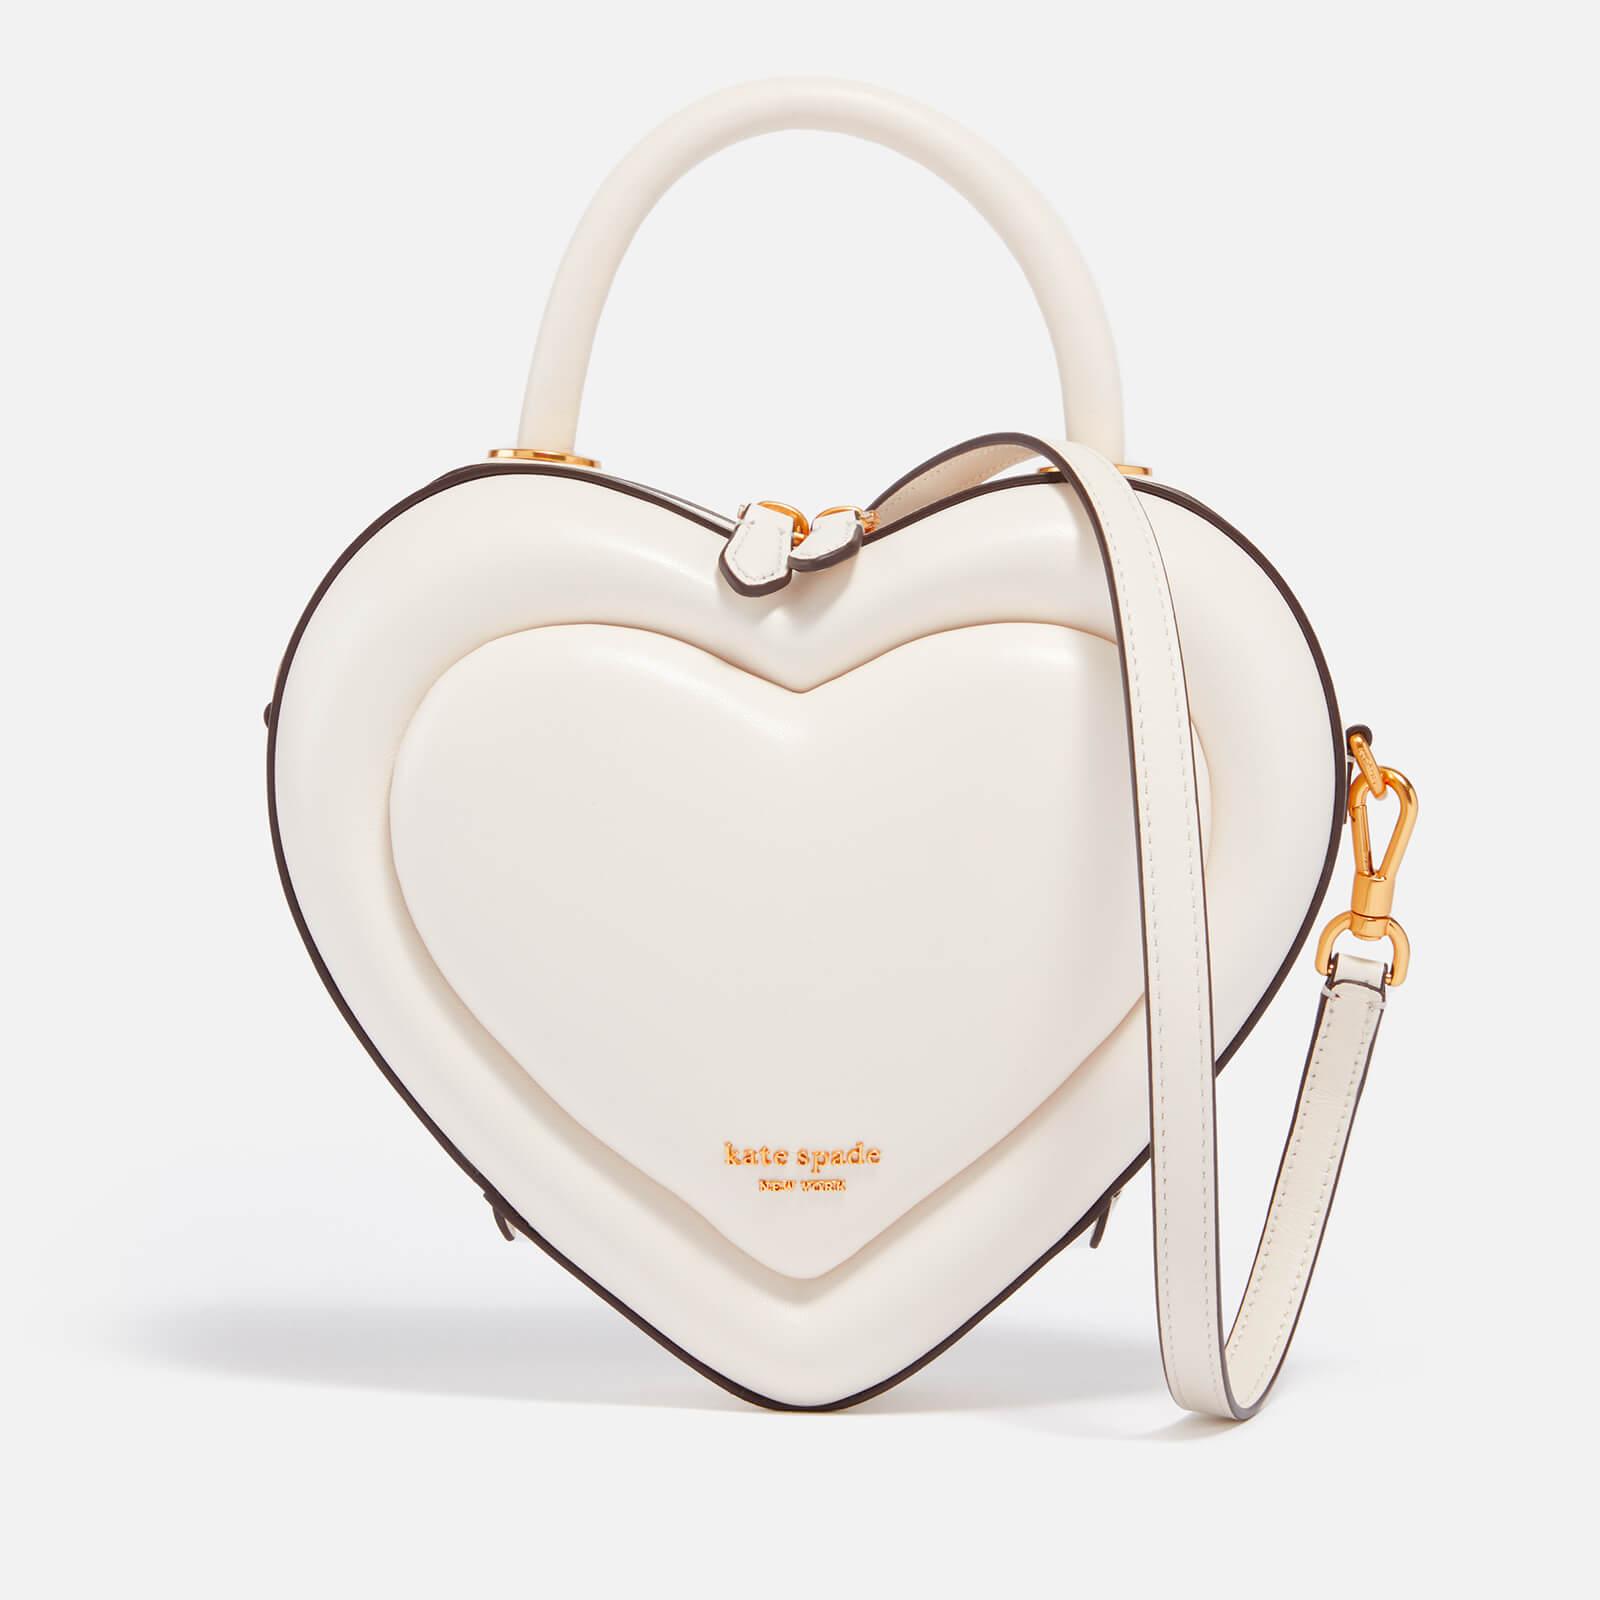 Kate Spade Pitter Patter 3d Heart Leather Bag in Metallic | Lyst